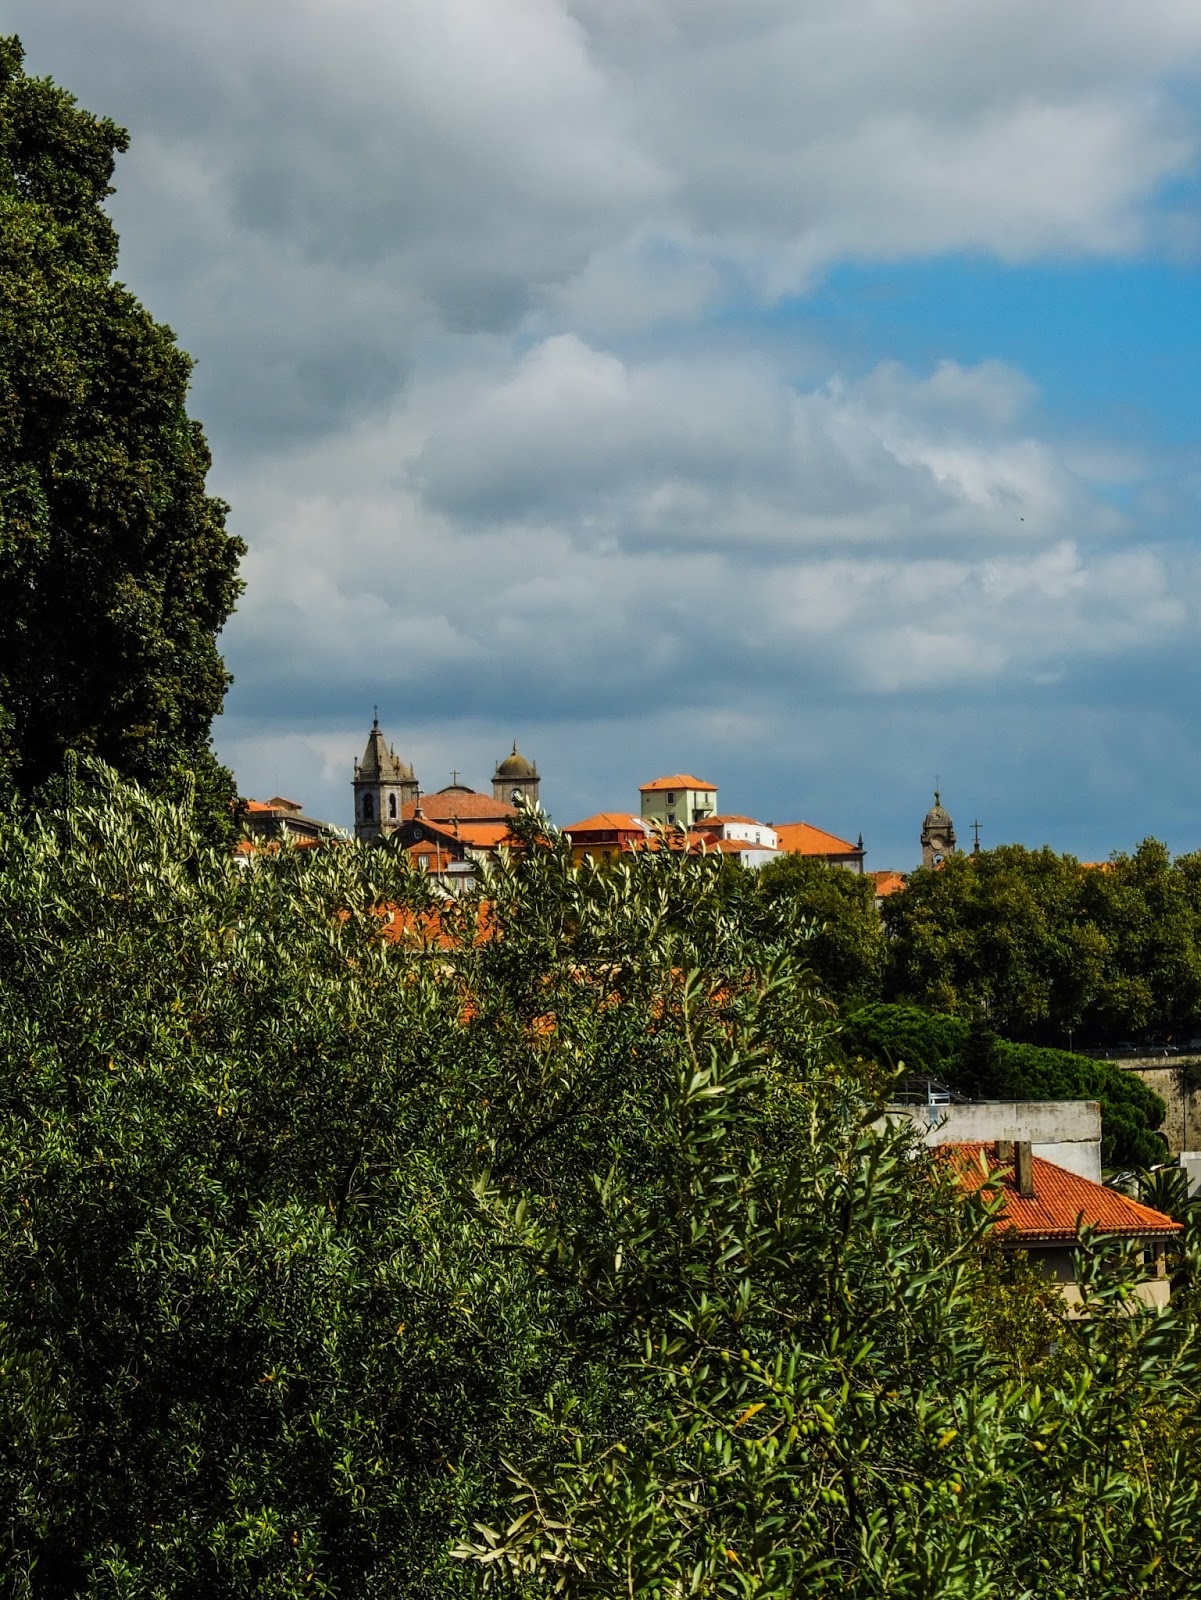 Terracotta roofs and towers showing over tree tops in Porto, Portugal.